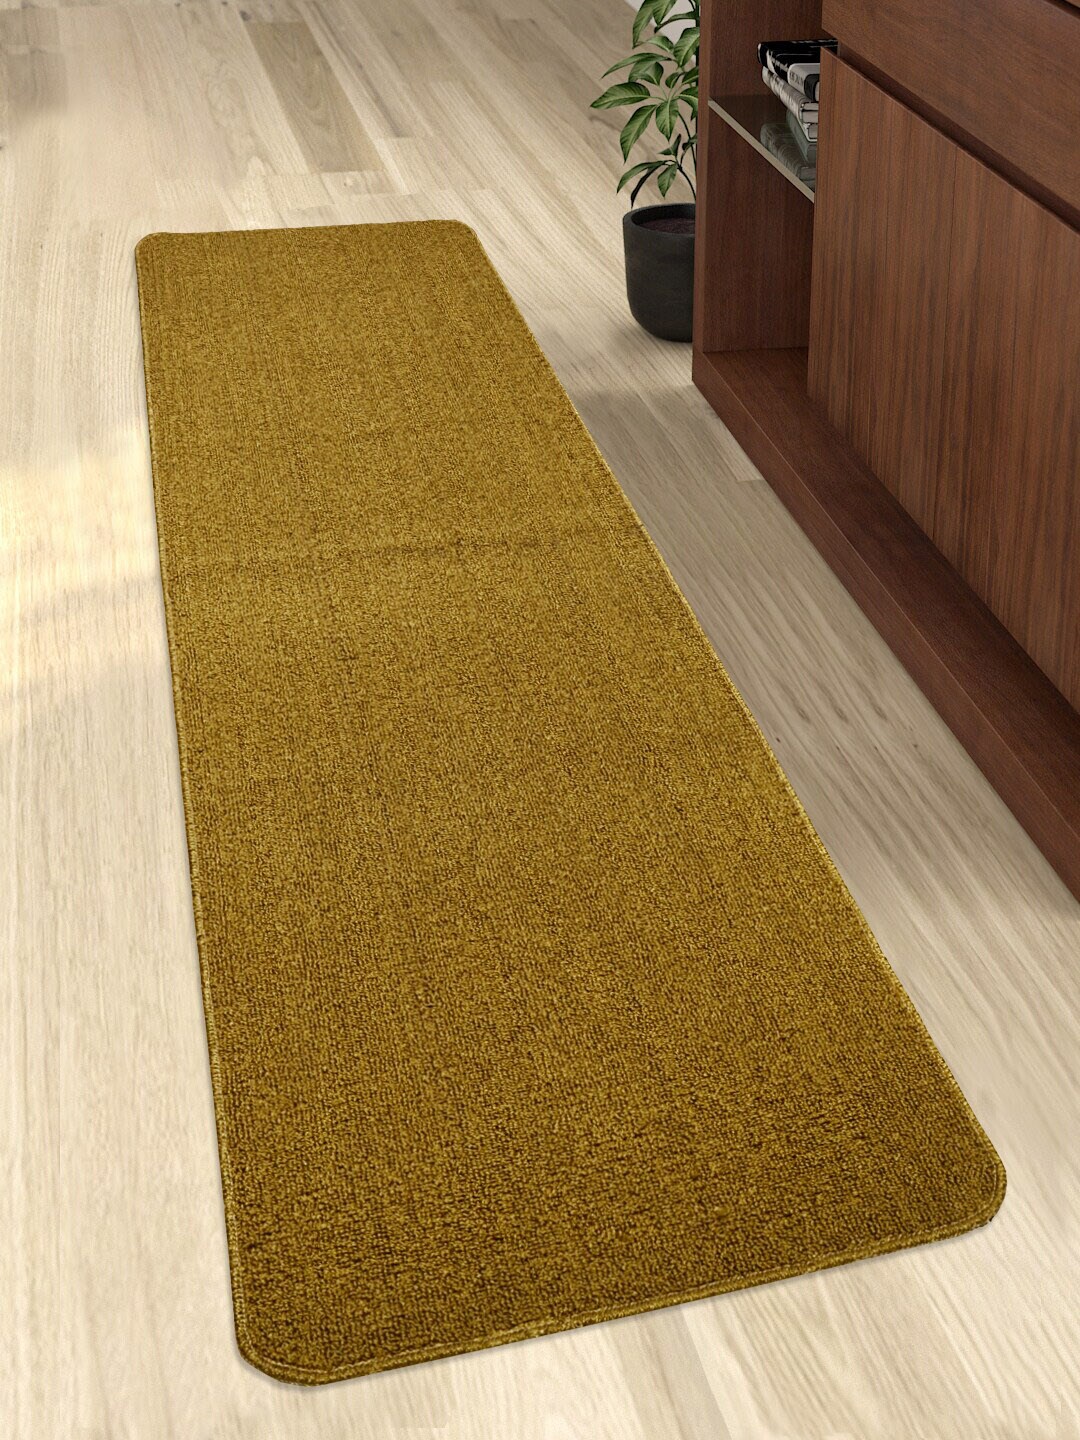 Saral Home Gold-Coloured Solid Antiskid Floor Runner Price in India